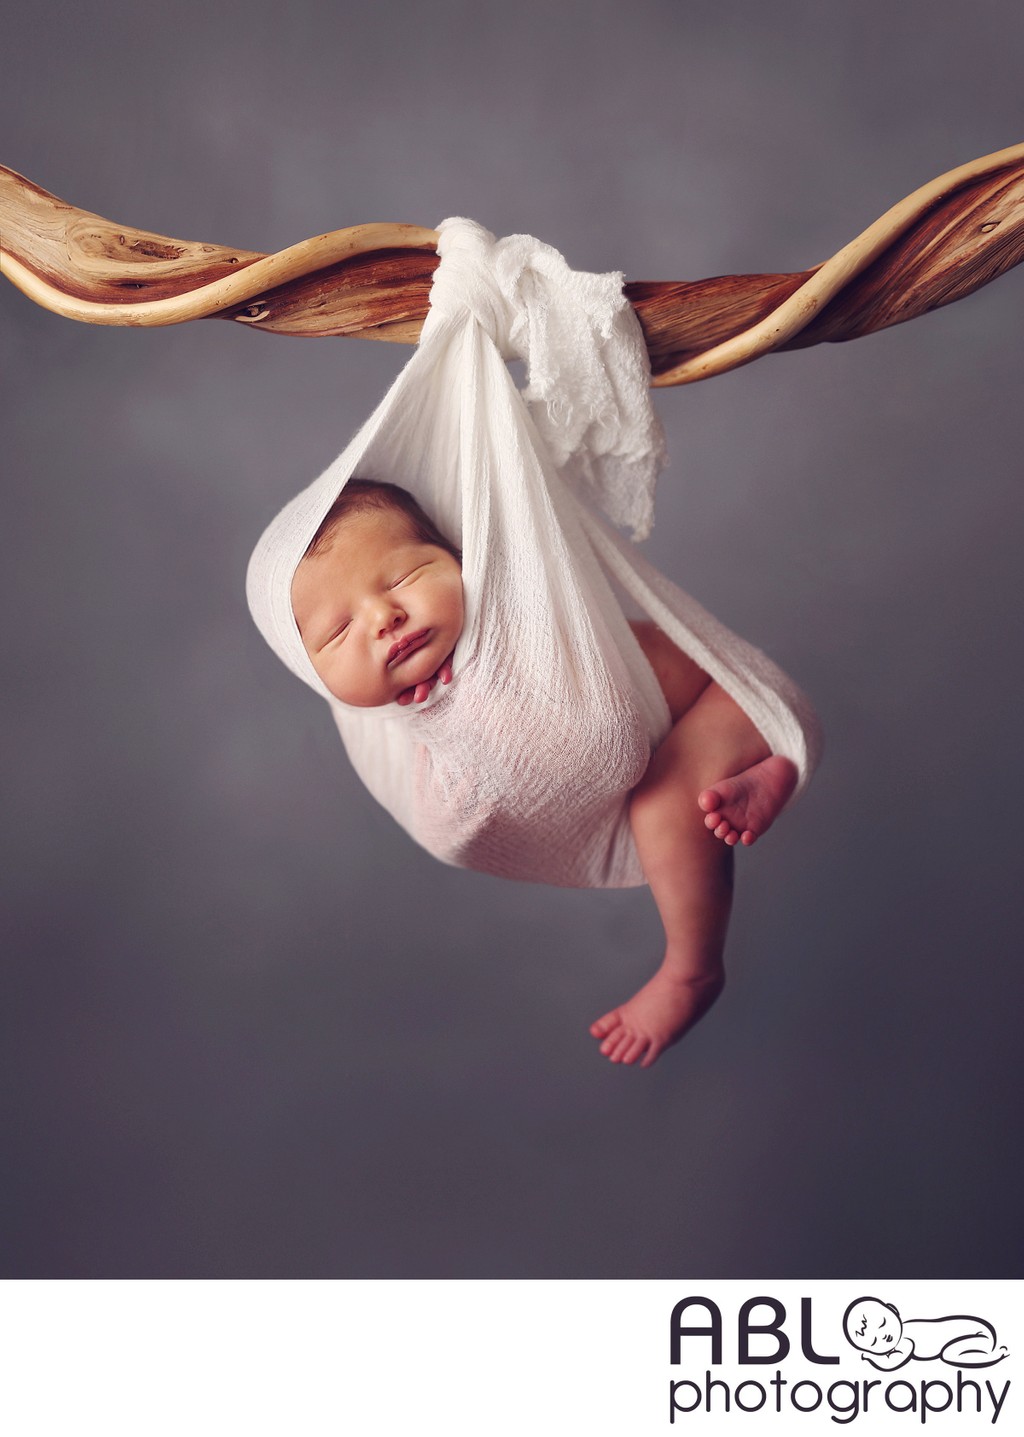 Baby hanging from tree branch